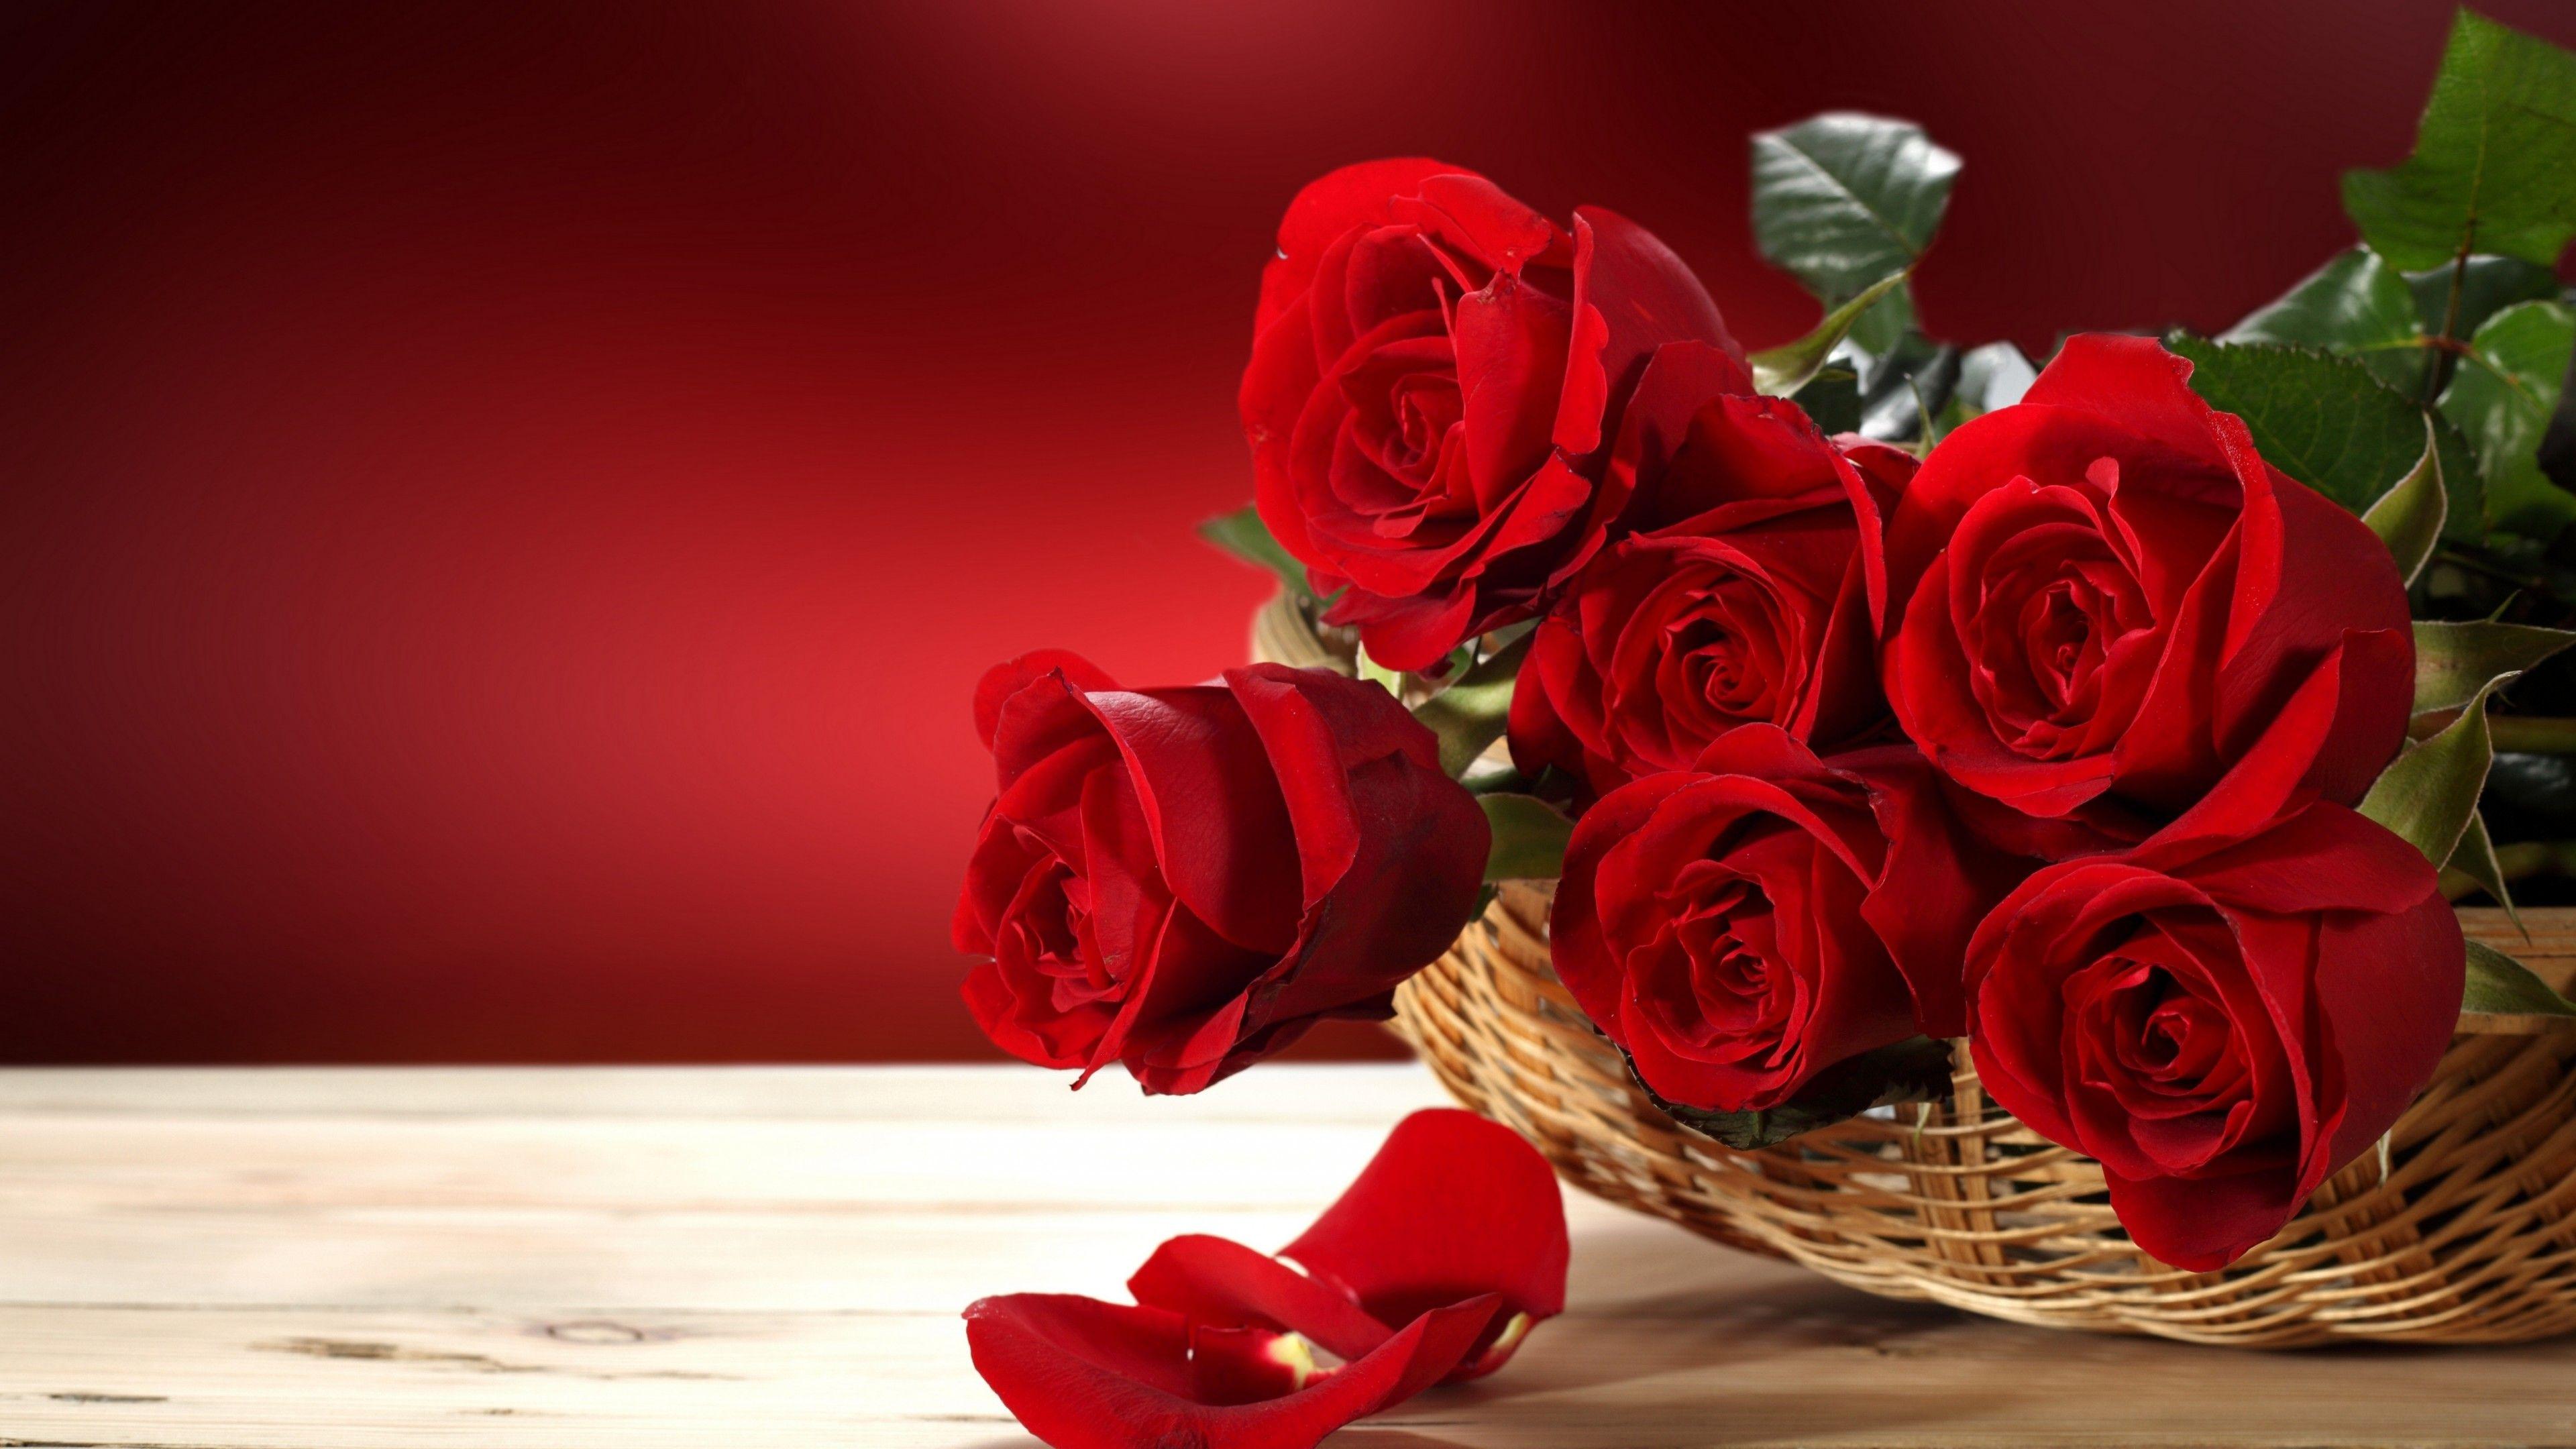 Red Rose 4k Wallpapers Top Free Red Rose 4k Backgrounds Wallpaperaccess 0889